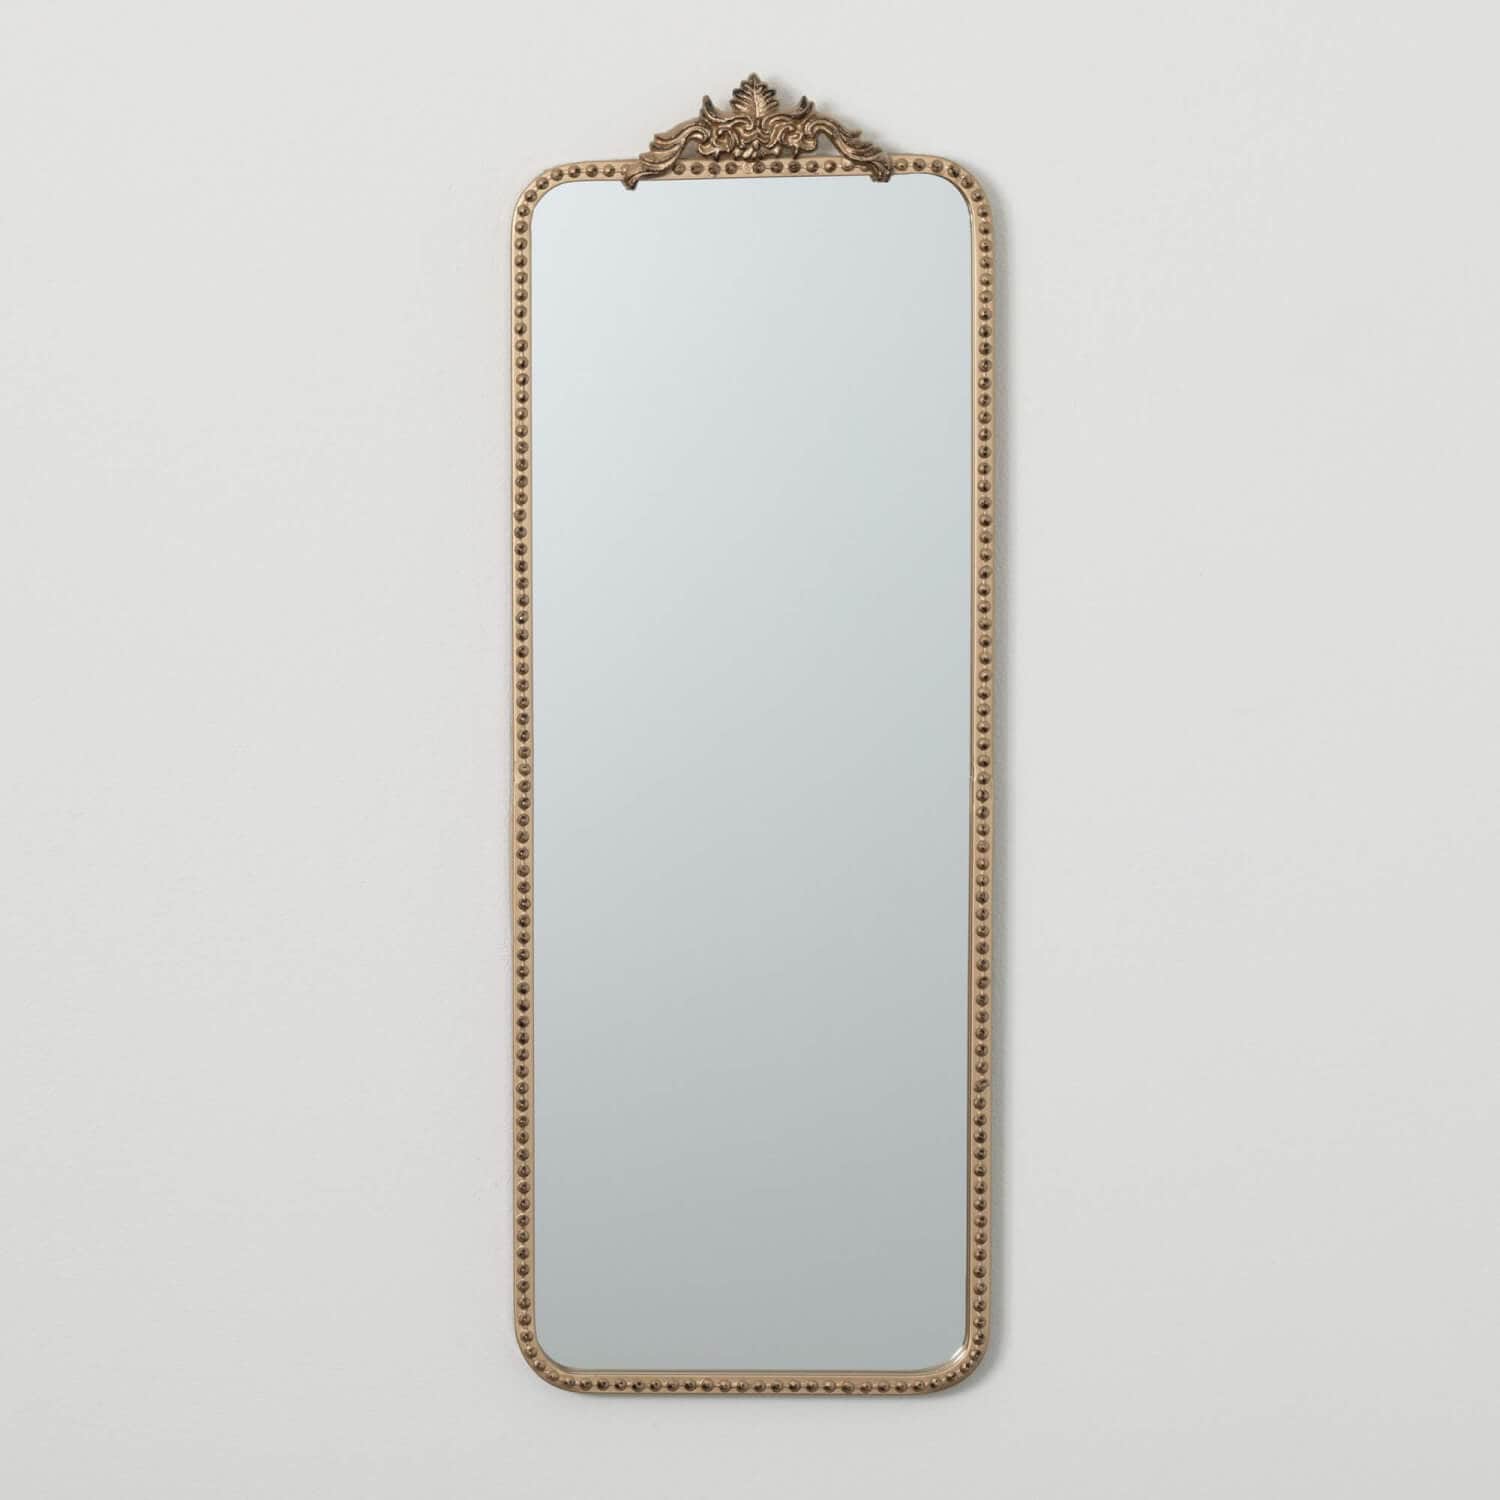 Elongated Gold-Trimmed Wall Mirror Elevate Home Decor - Mirrors